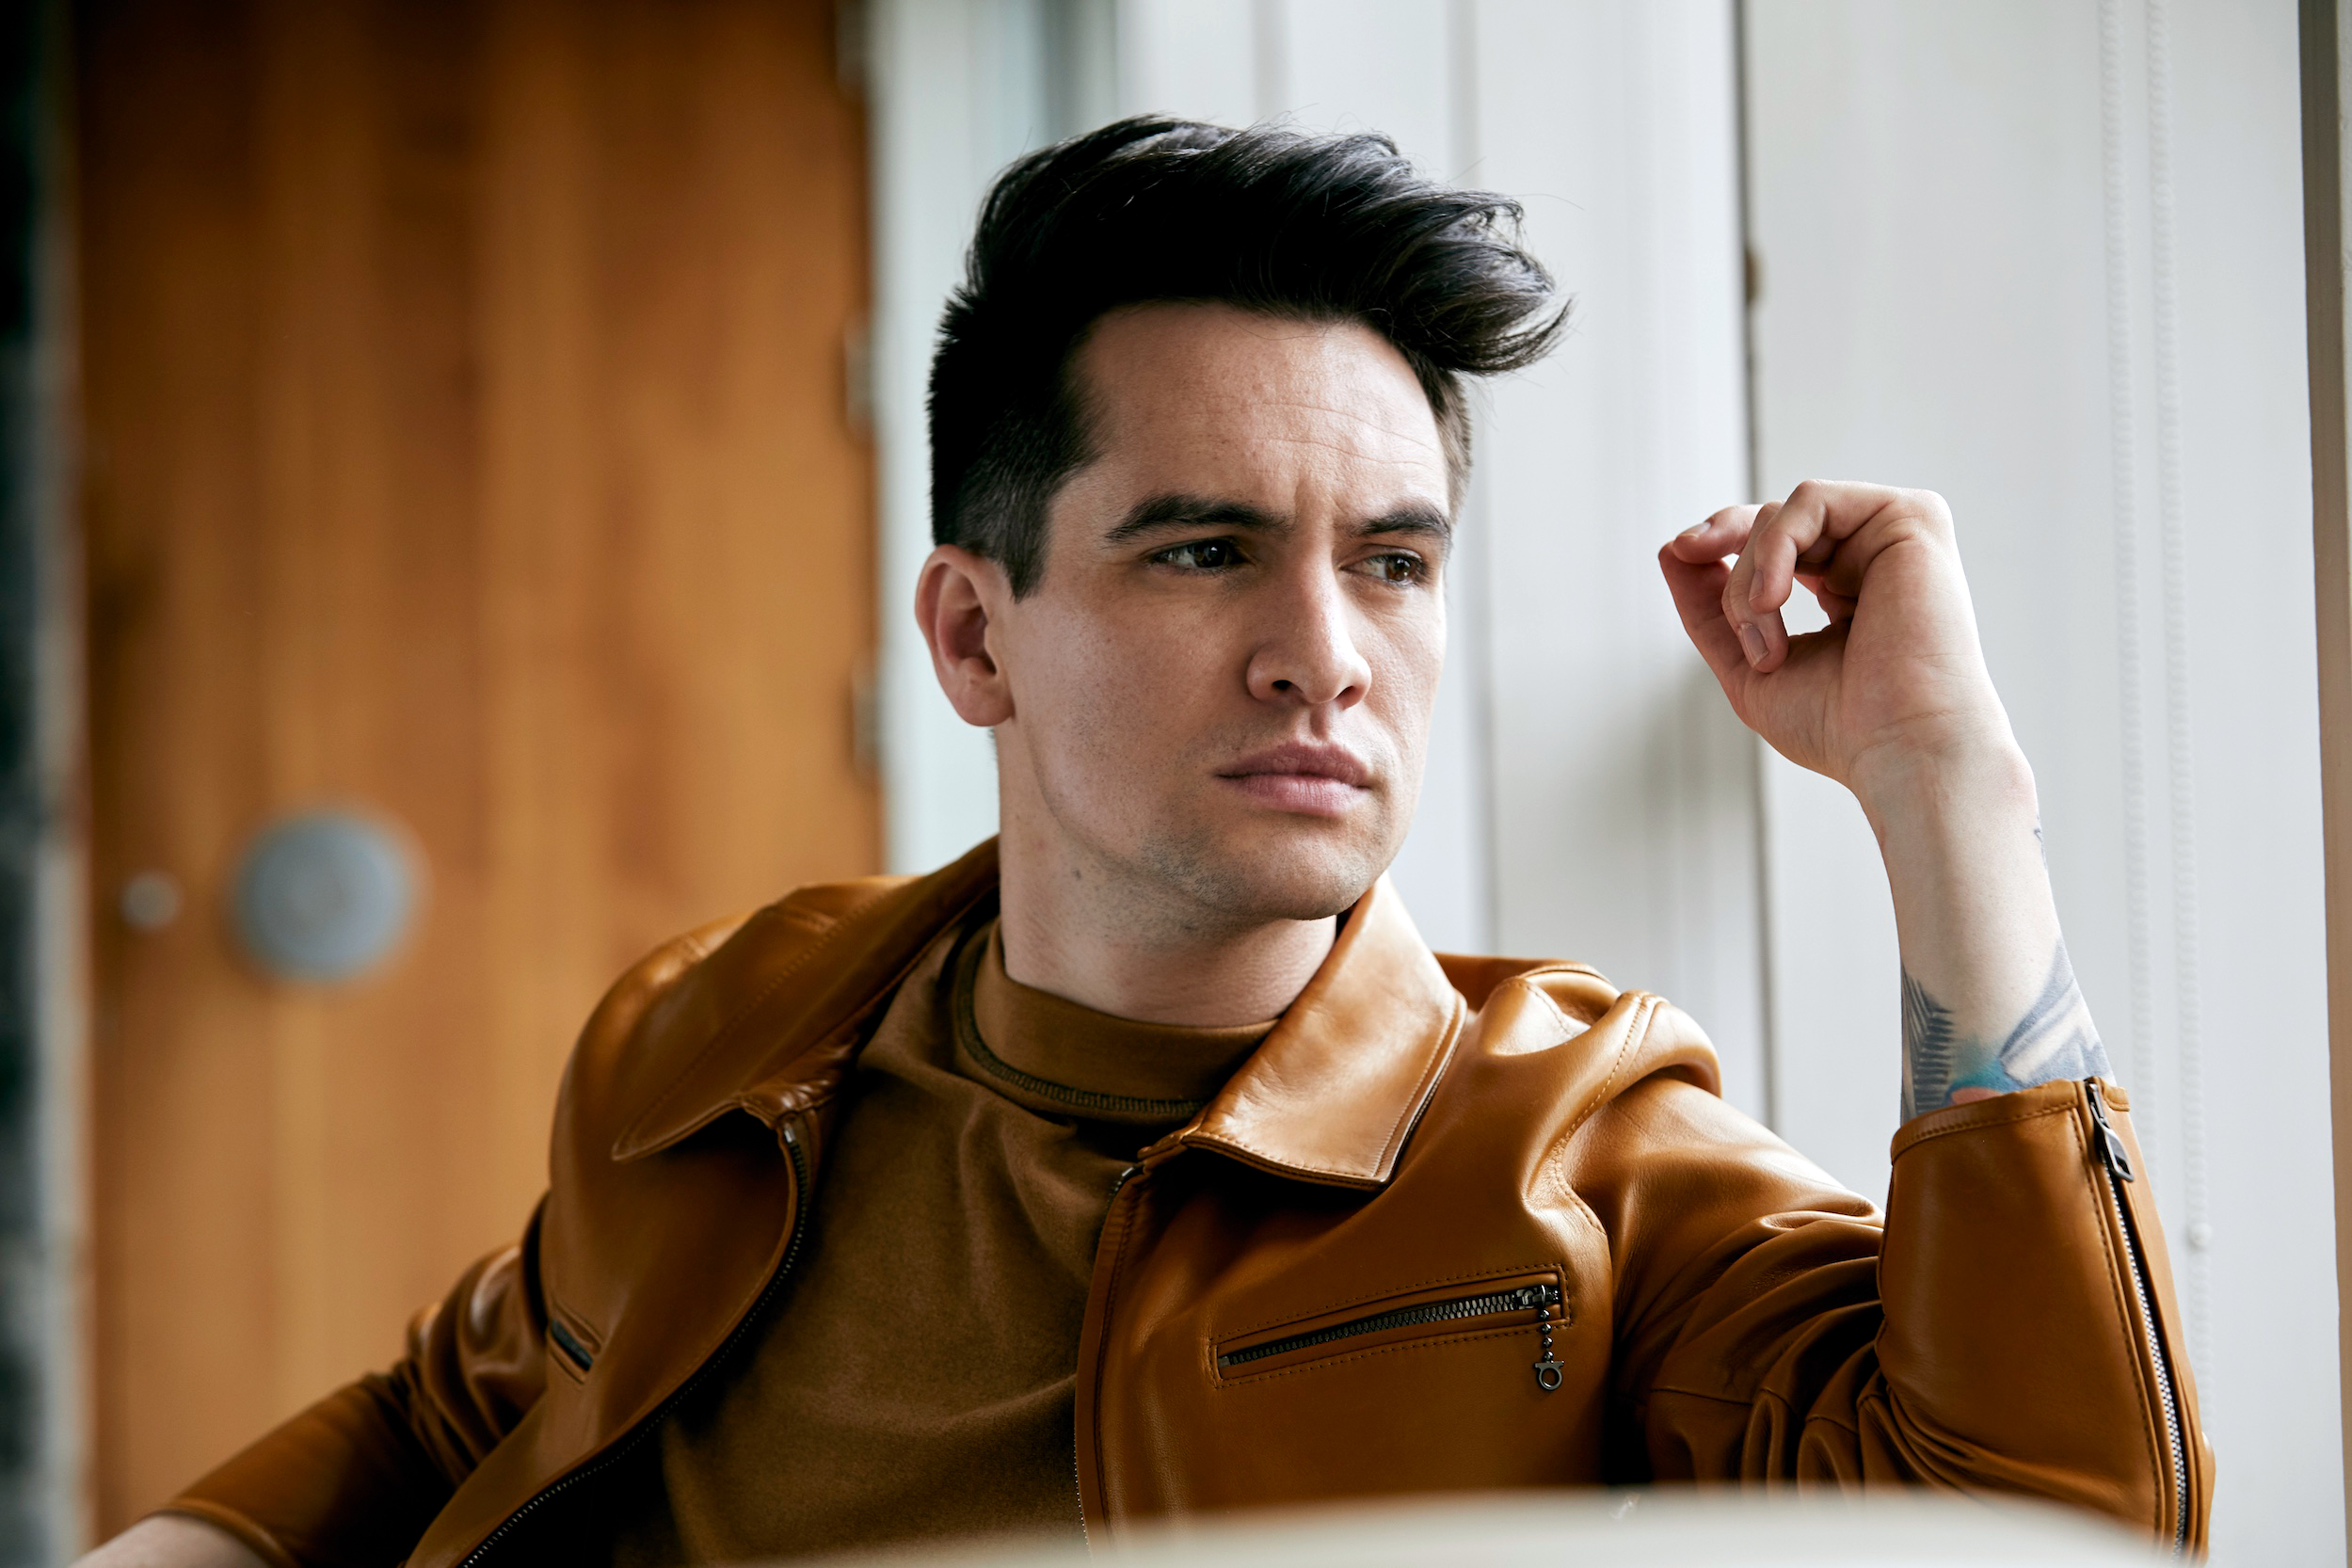 Panic! At the Disco's Brendon Urie Comes Out as Pansexual Rolling Stone